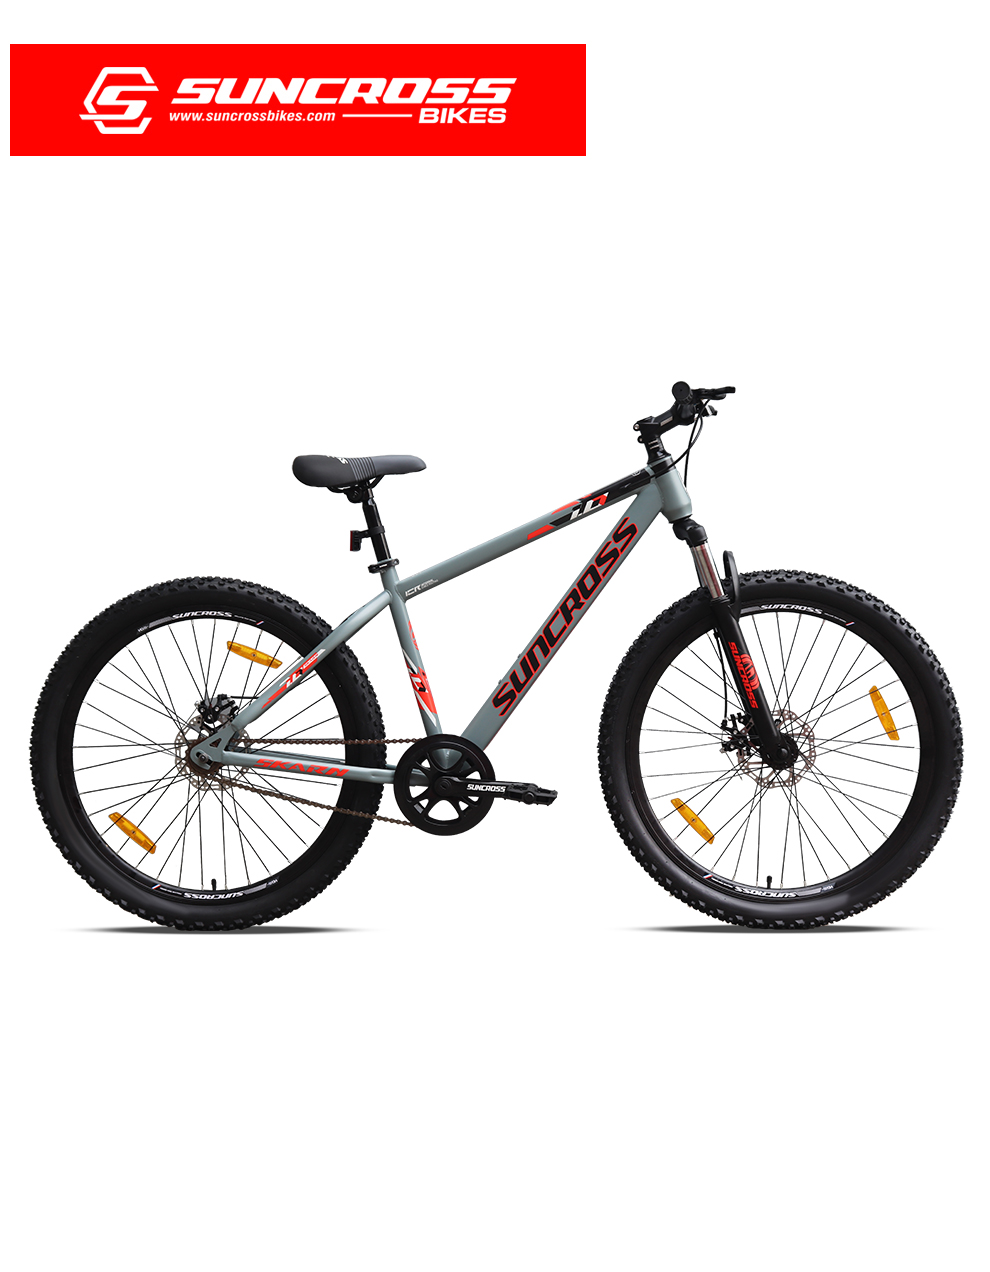 Buy Online Suncross Bikes Branded Bicycles Shop Gears Cycle Spares Accessories Store in India.